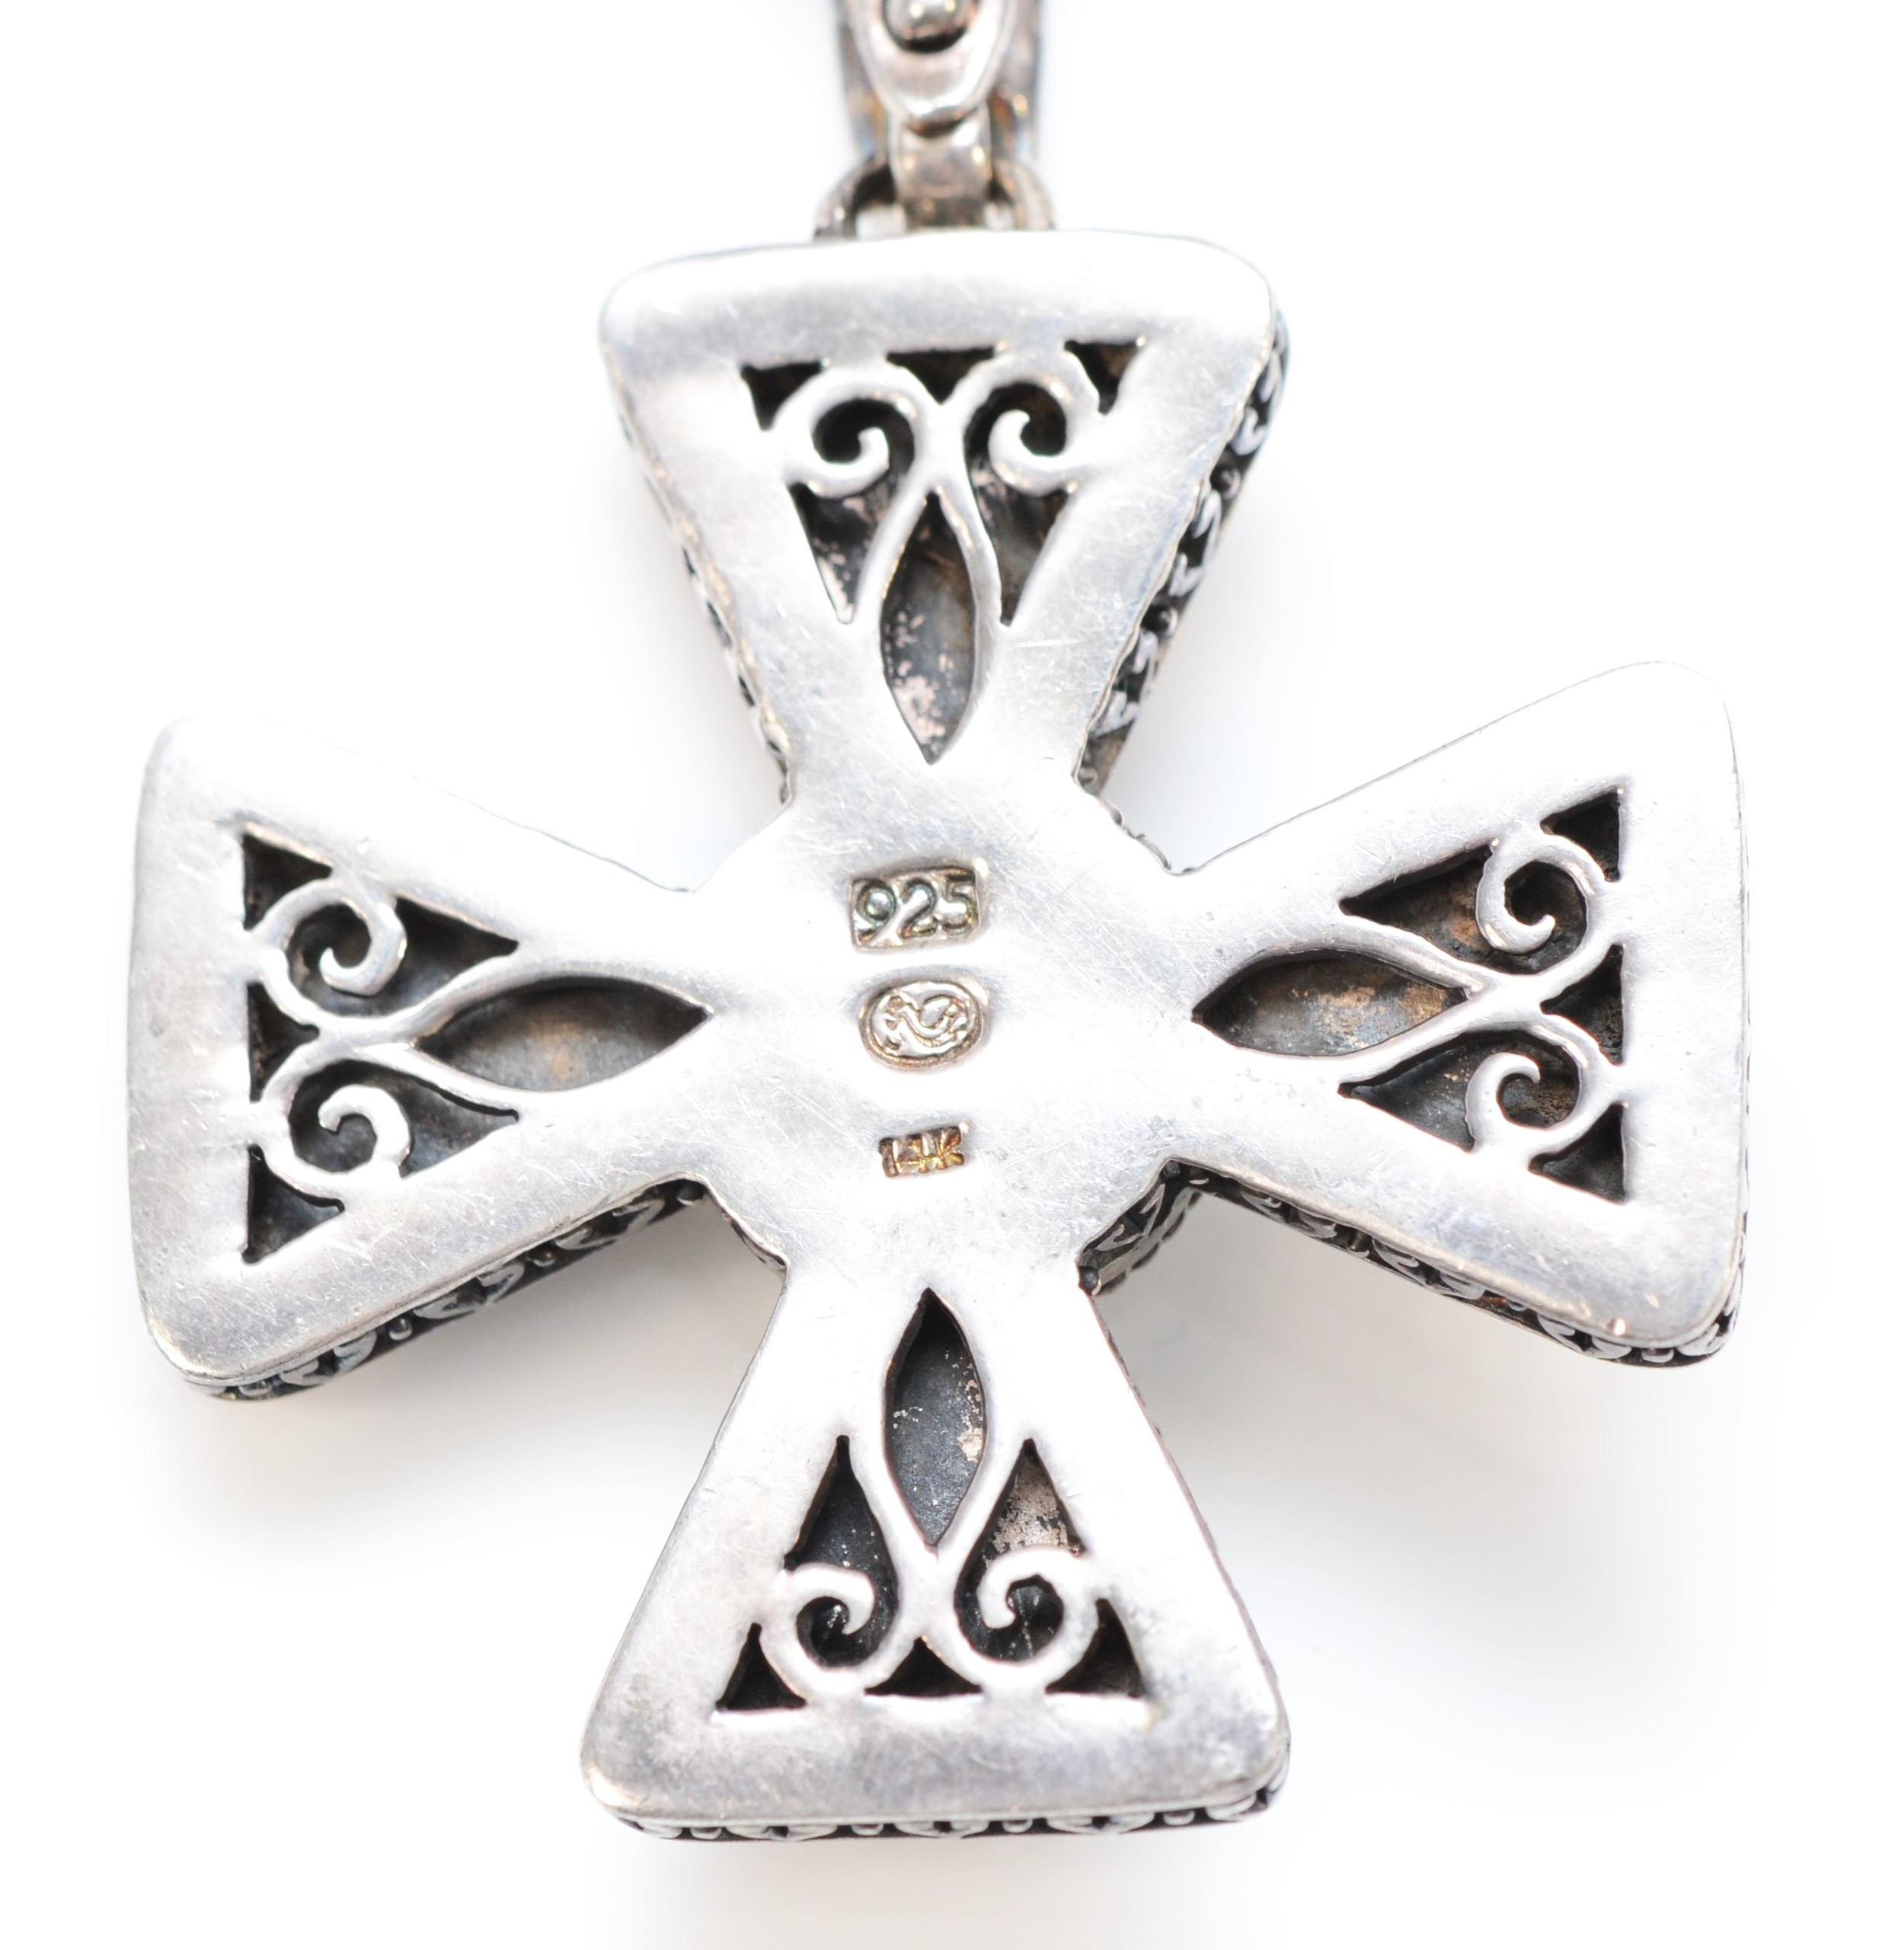 A 925 silver, 14K gold and pearl cross pendant 56 x 41mm, 41cm rope twist cahin, 53gm - Image 3 of 3